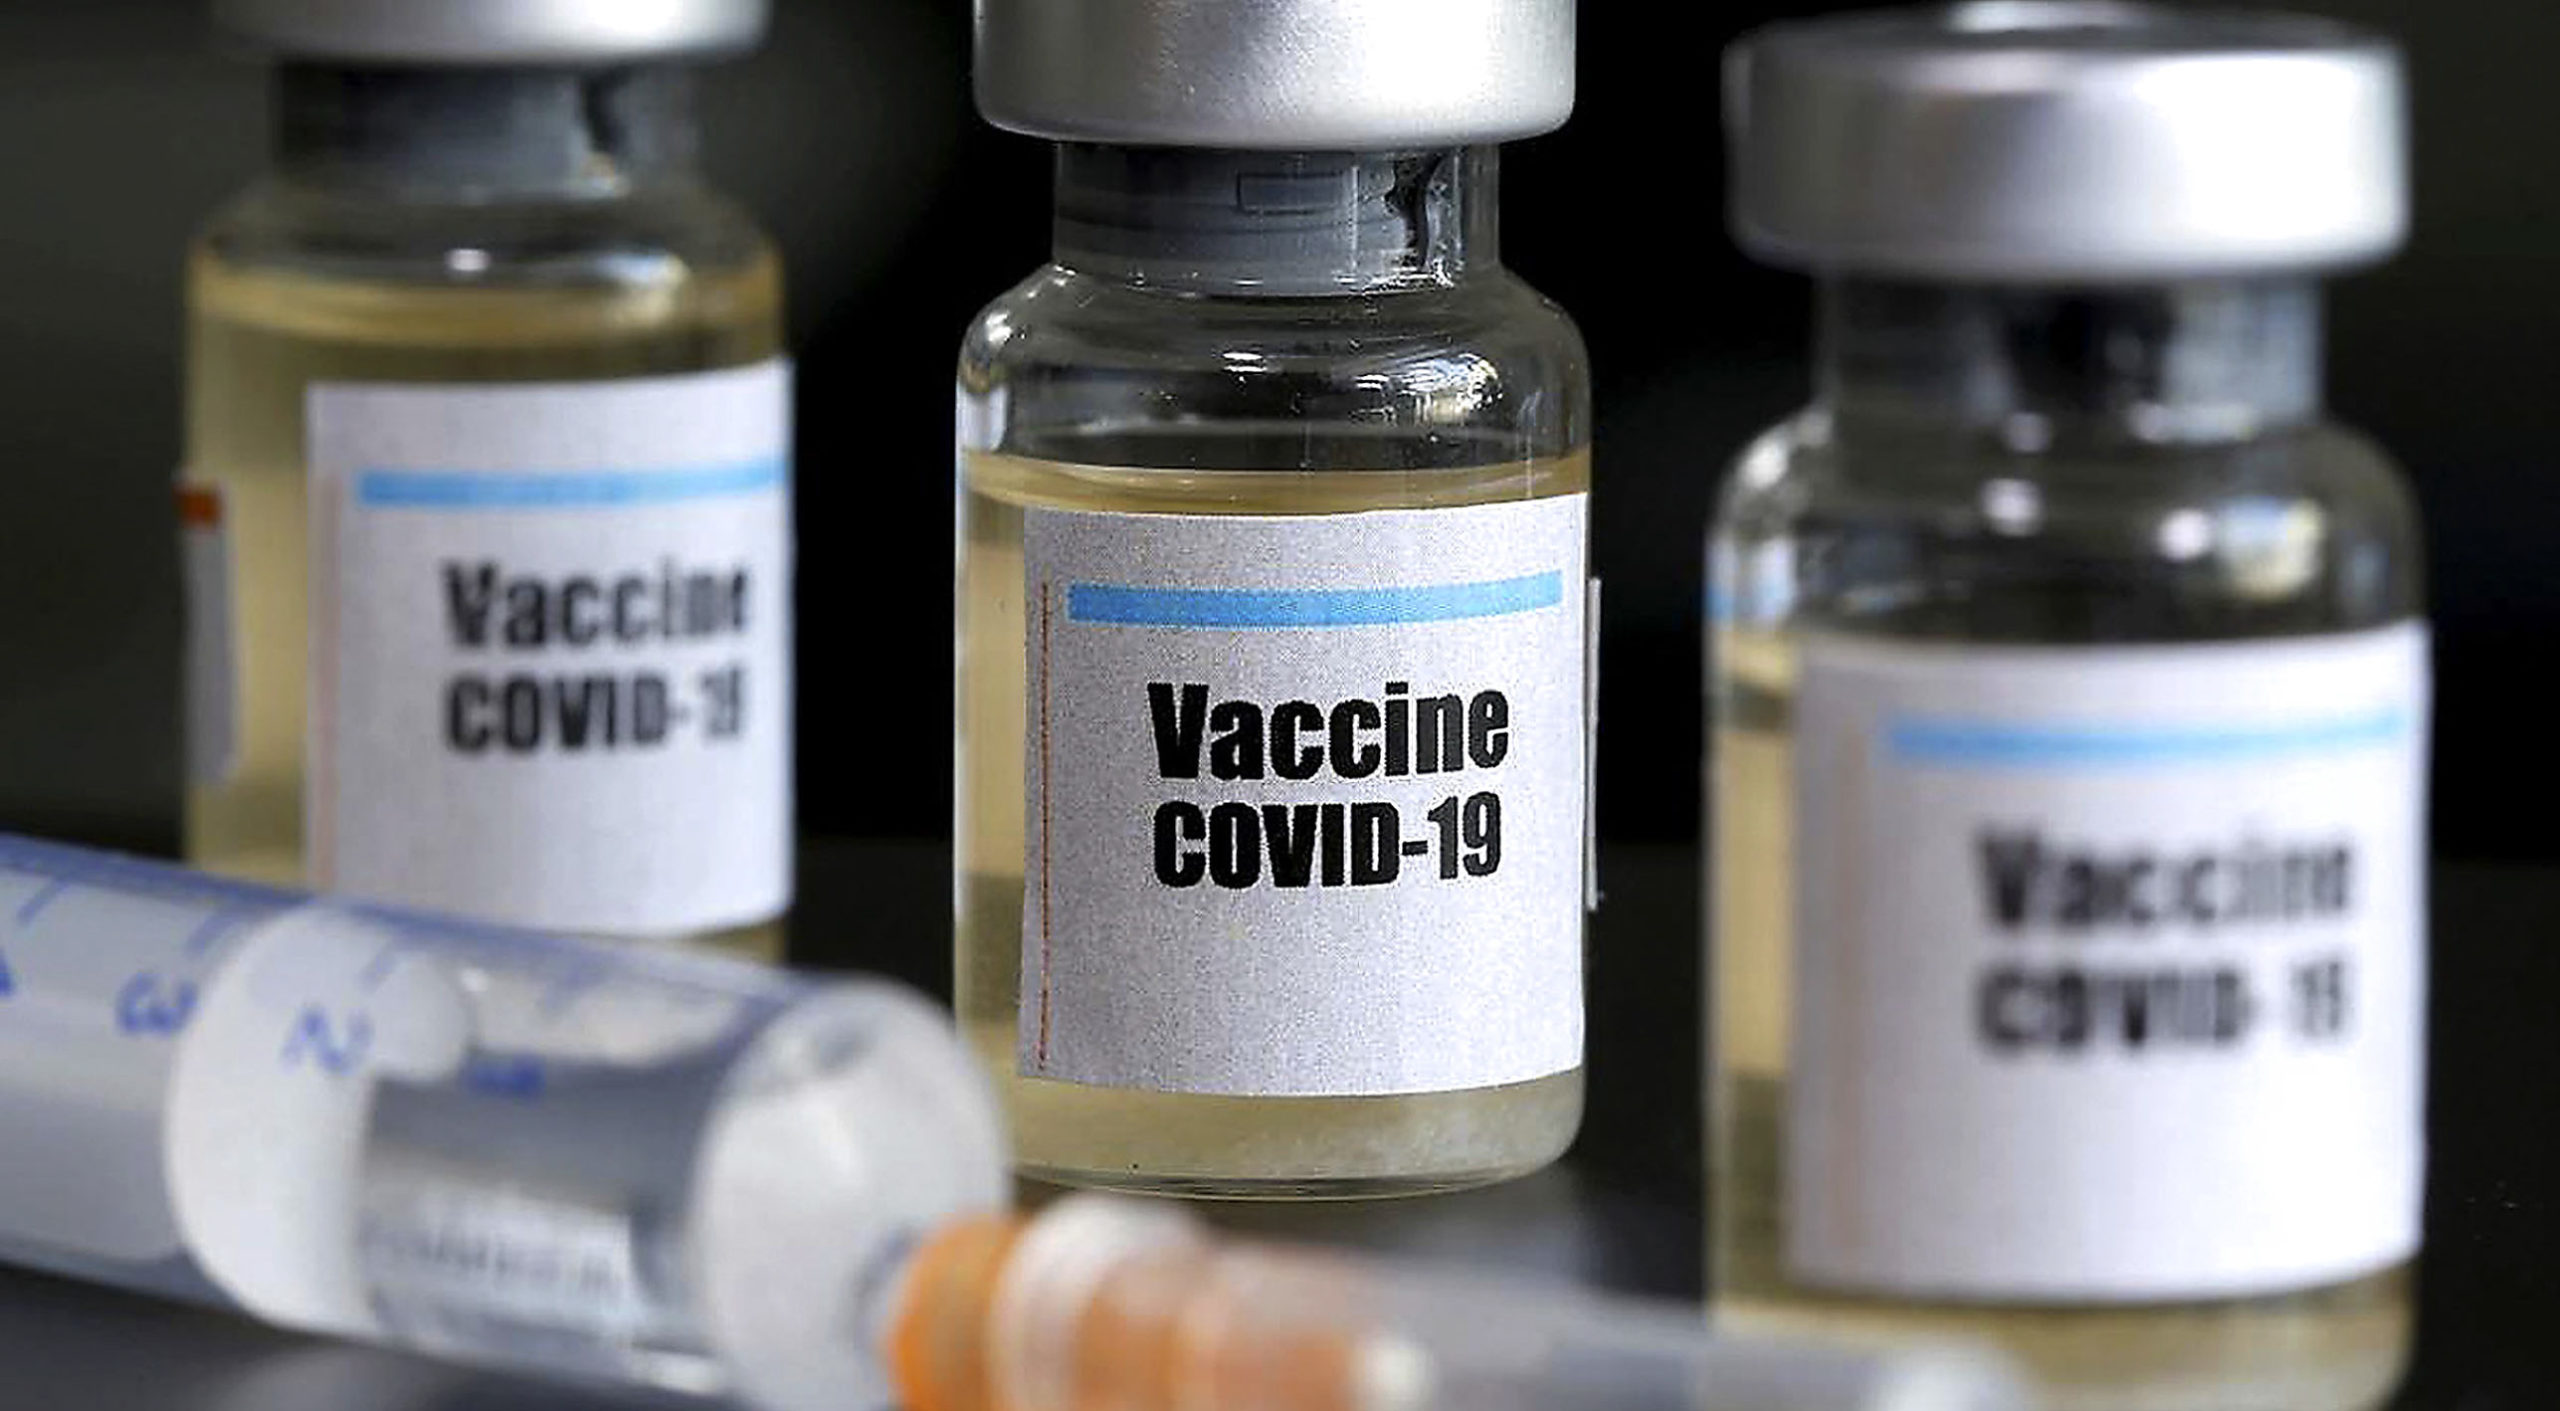 Afriforum says government has admitted under oath in its court documents that there is no legal restriction on the private sector to purchase the vaccines.